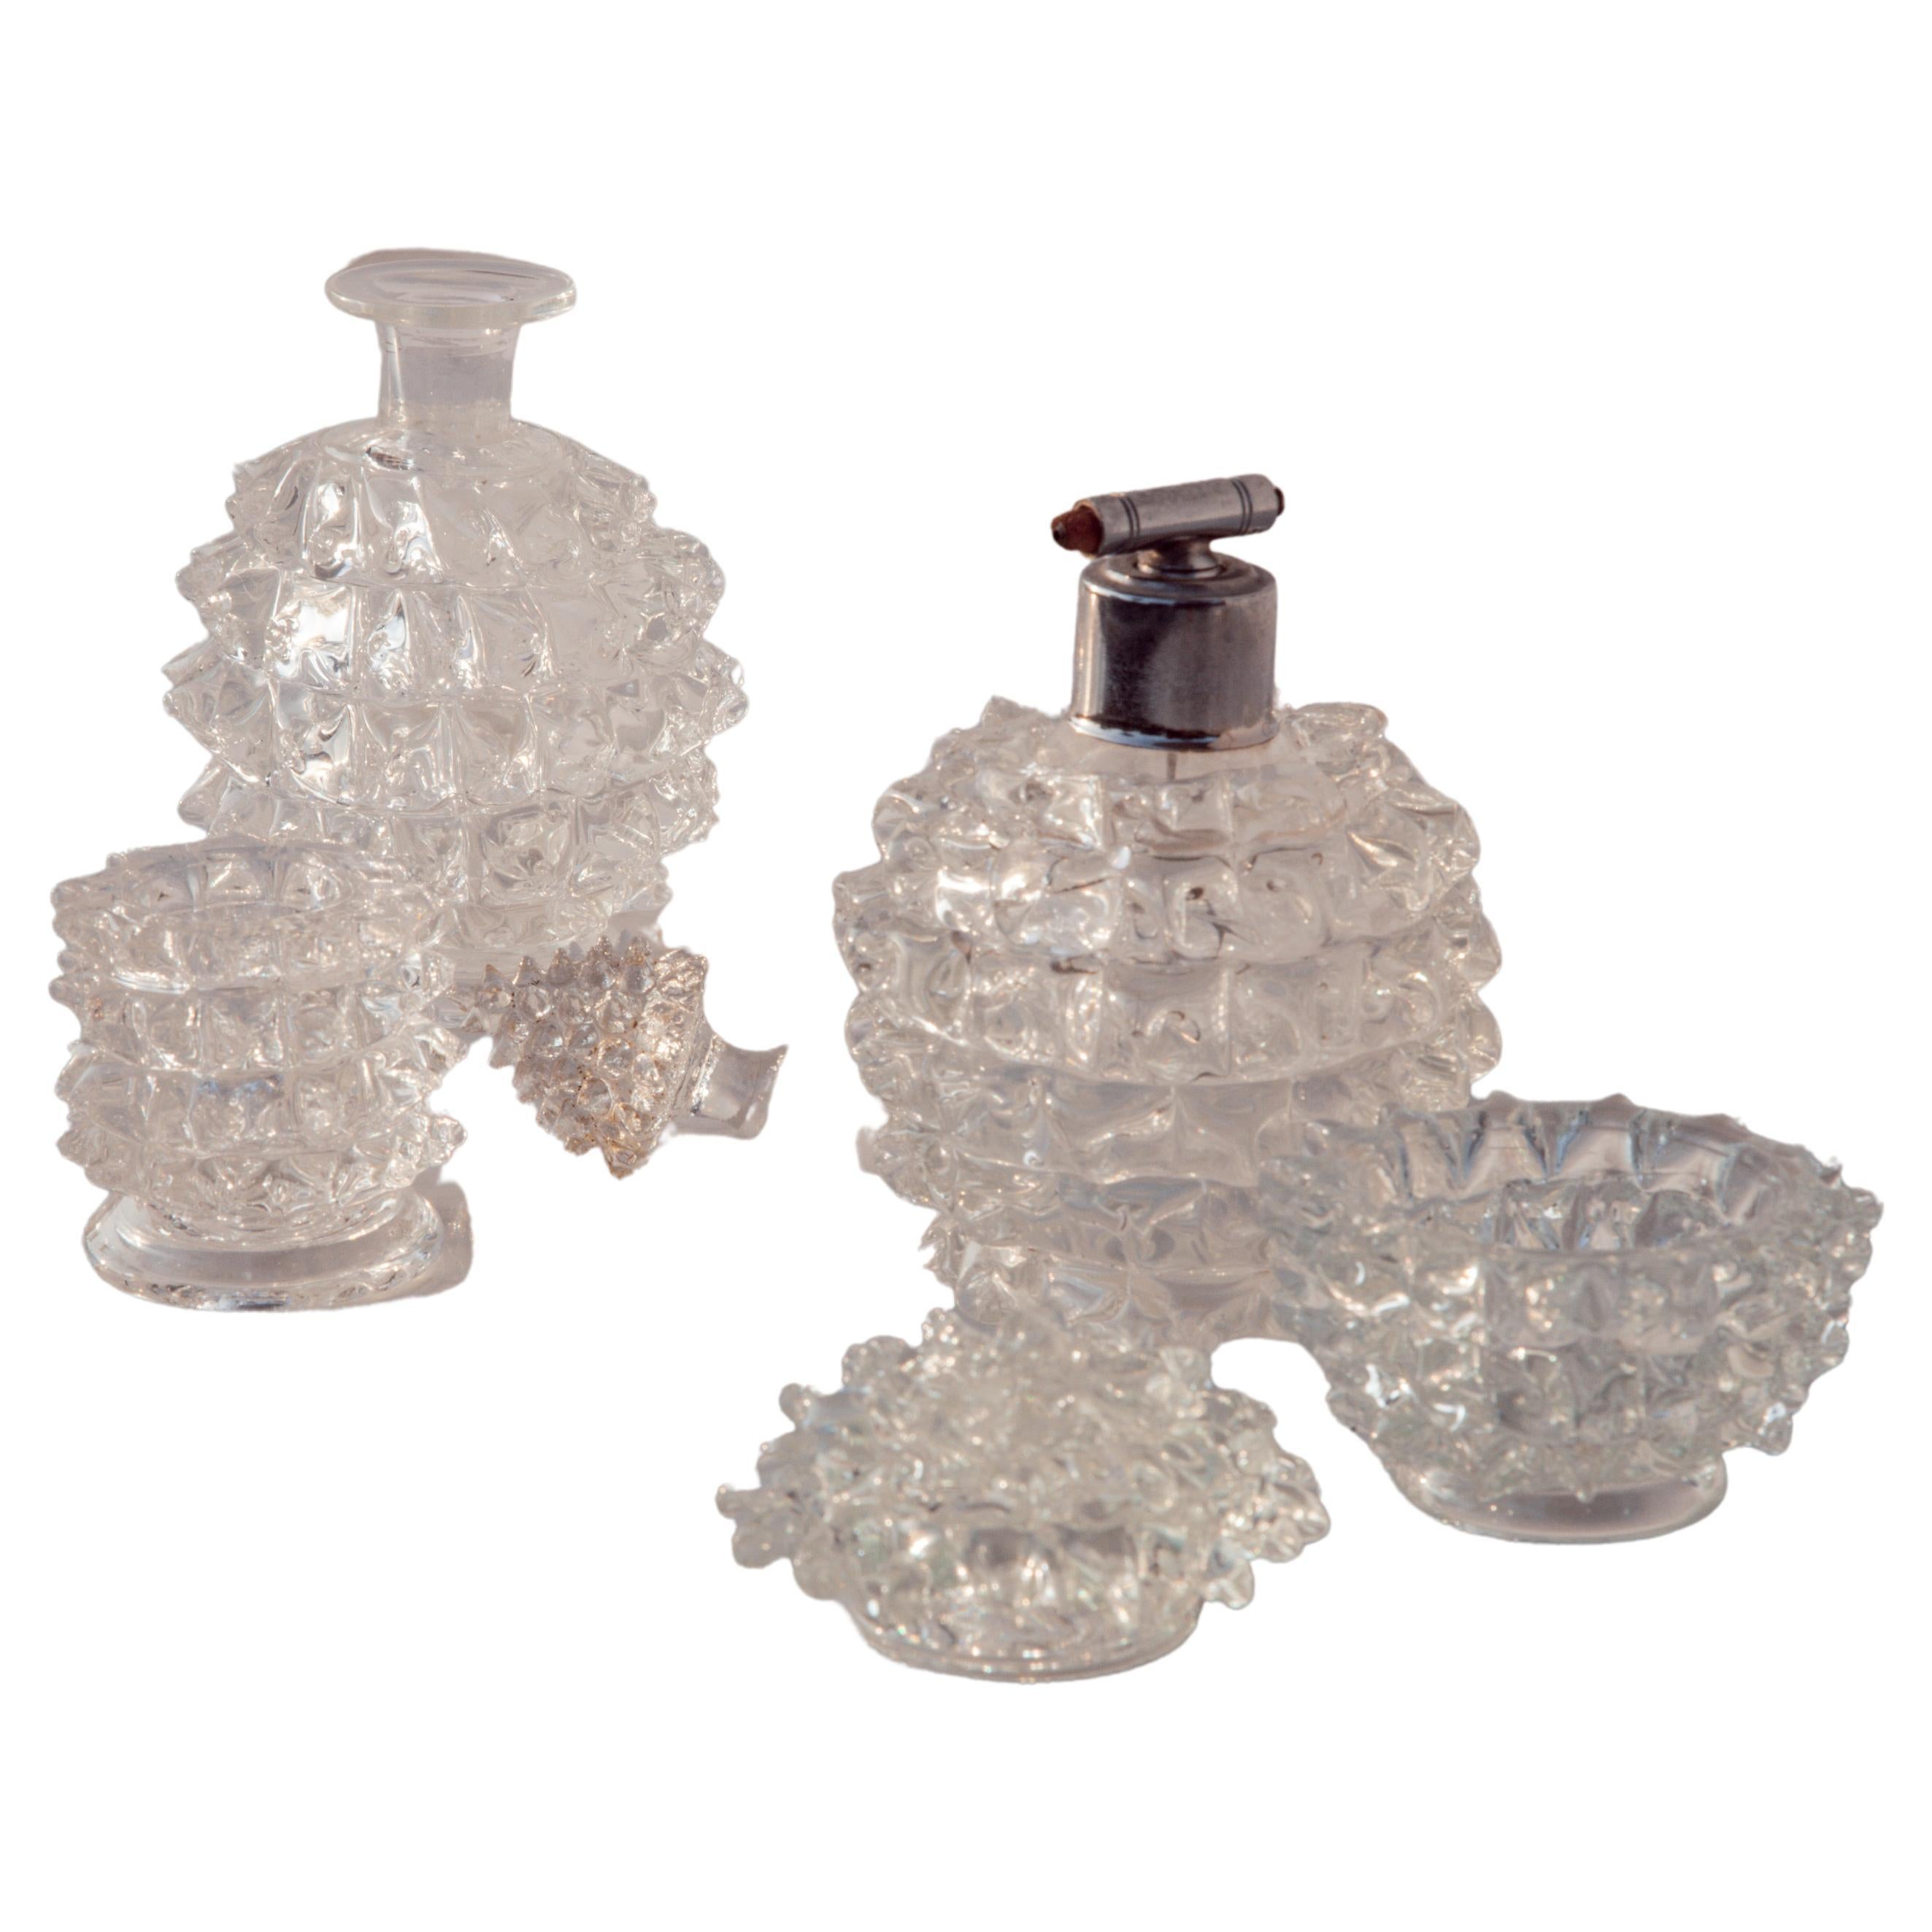 Exquisite and unique rare set of 4 vases attributed to Ercole Barovier using the Rostrato glass technique.

The set is sold in its entirety and includes 4 pieces.

Bottle with stopper:

h 17 cntimeters
diameter 10 centimeters

Perfume vase:
h13 
D.